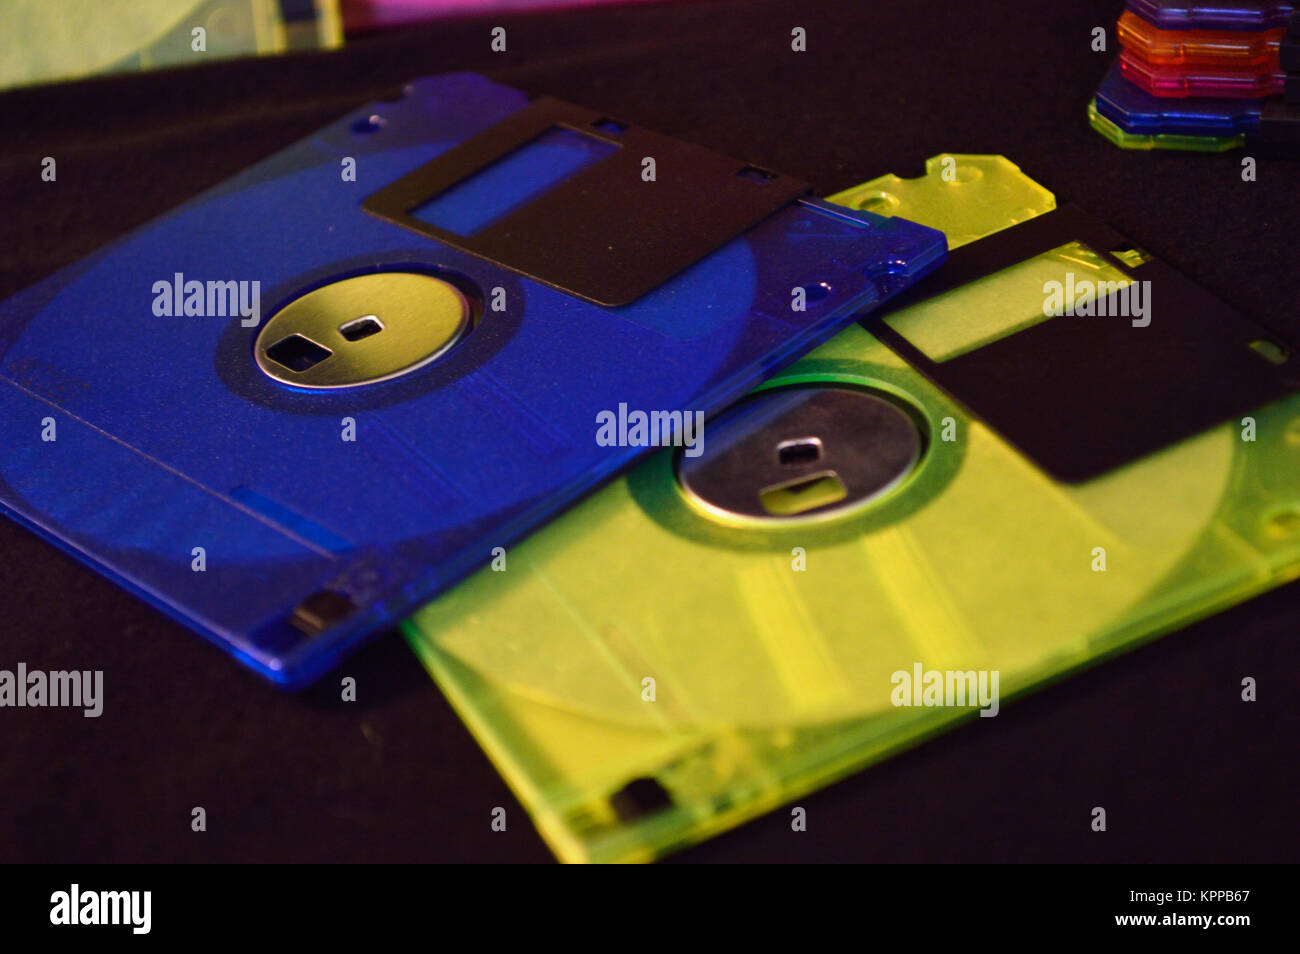 Closeup of blue and yellow green floppy disk Stock Photo